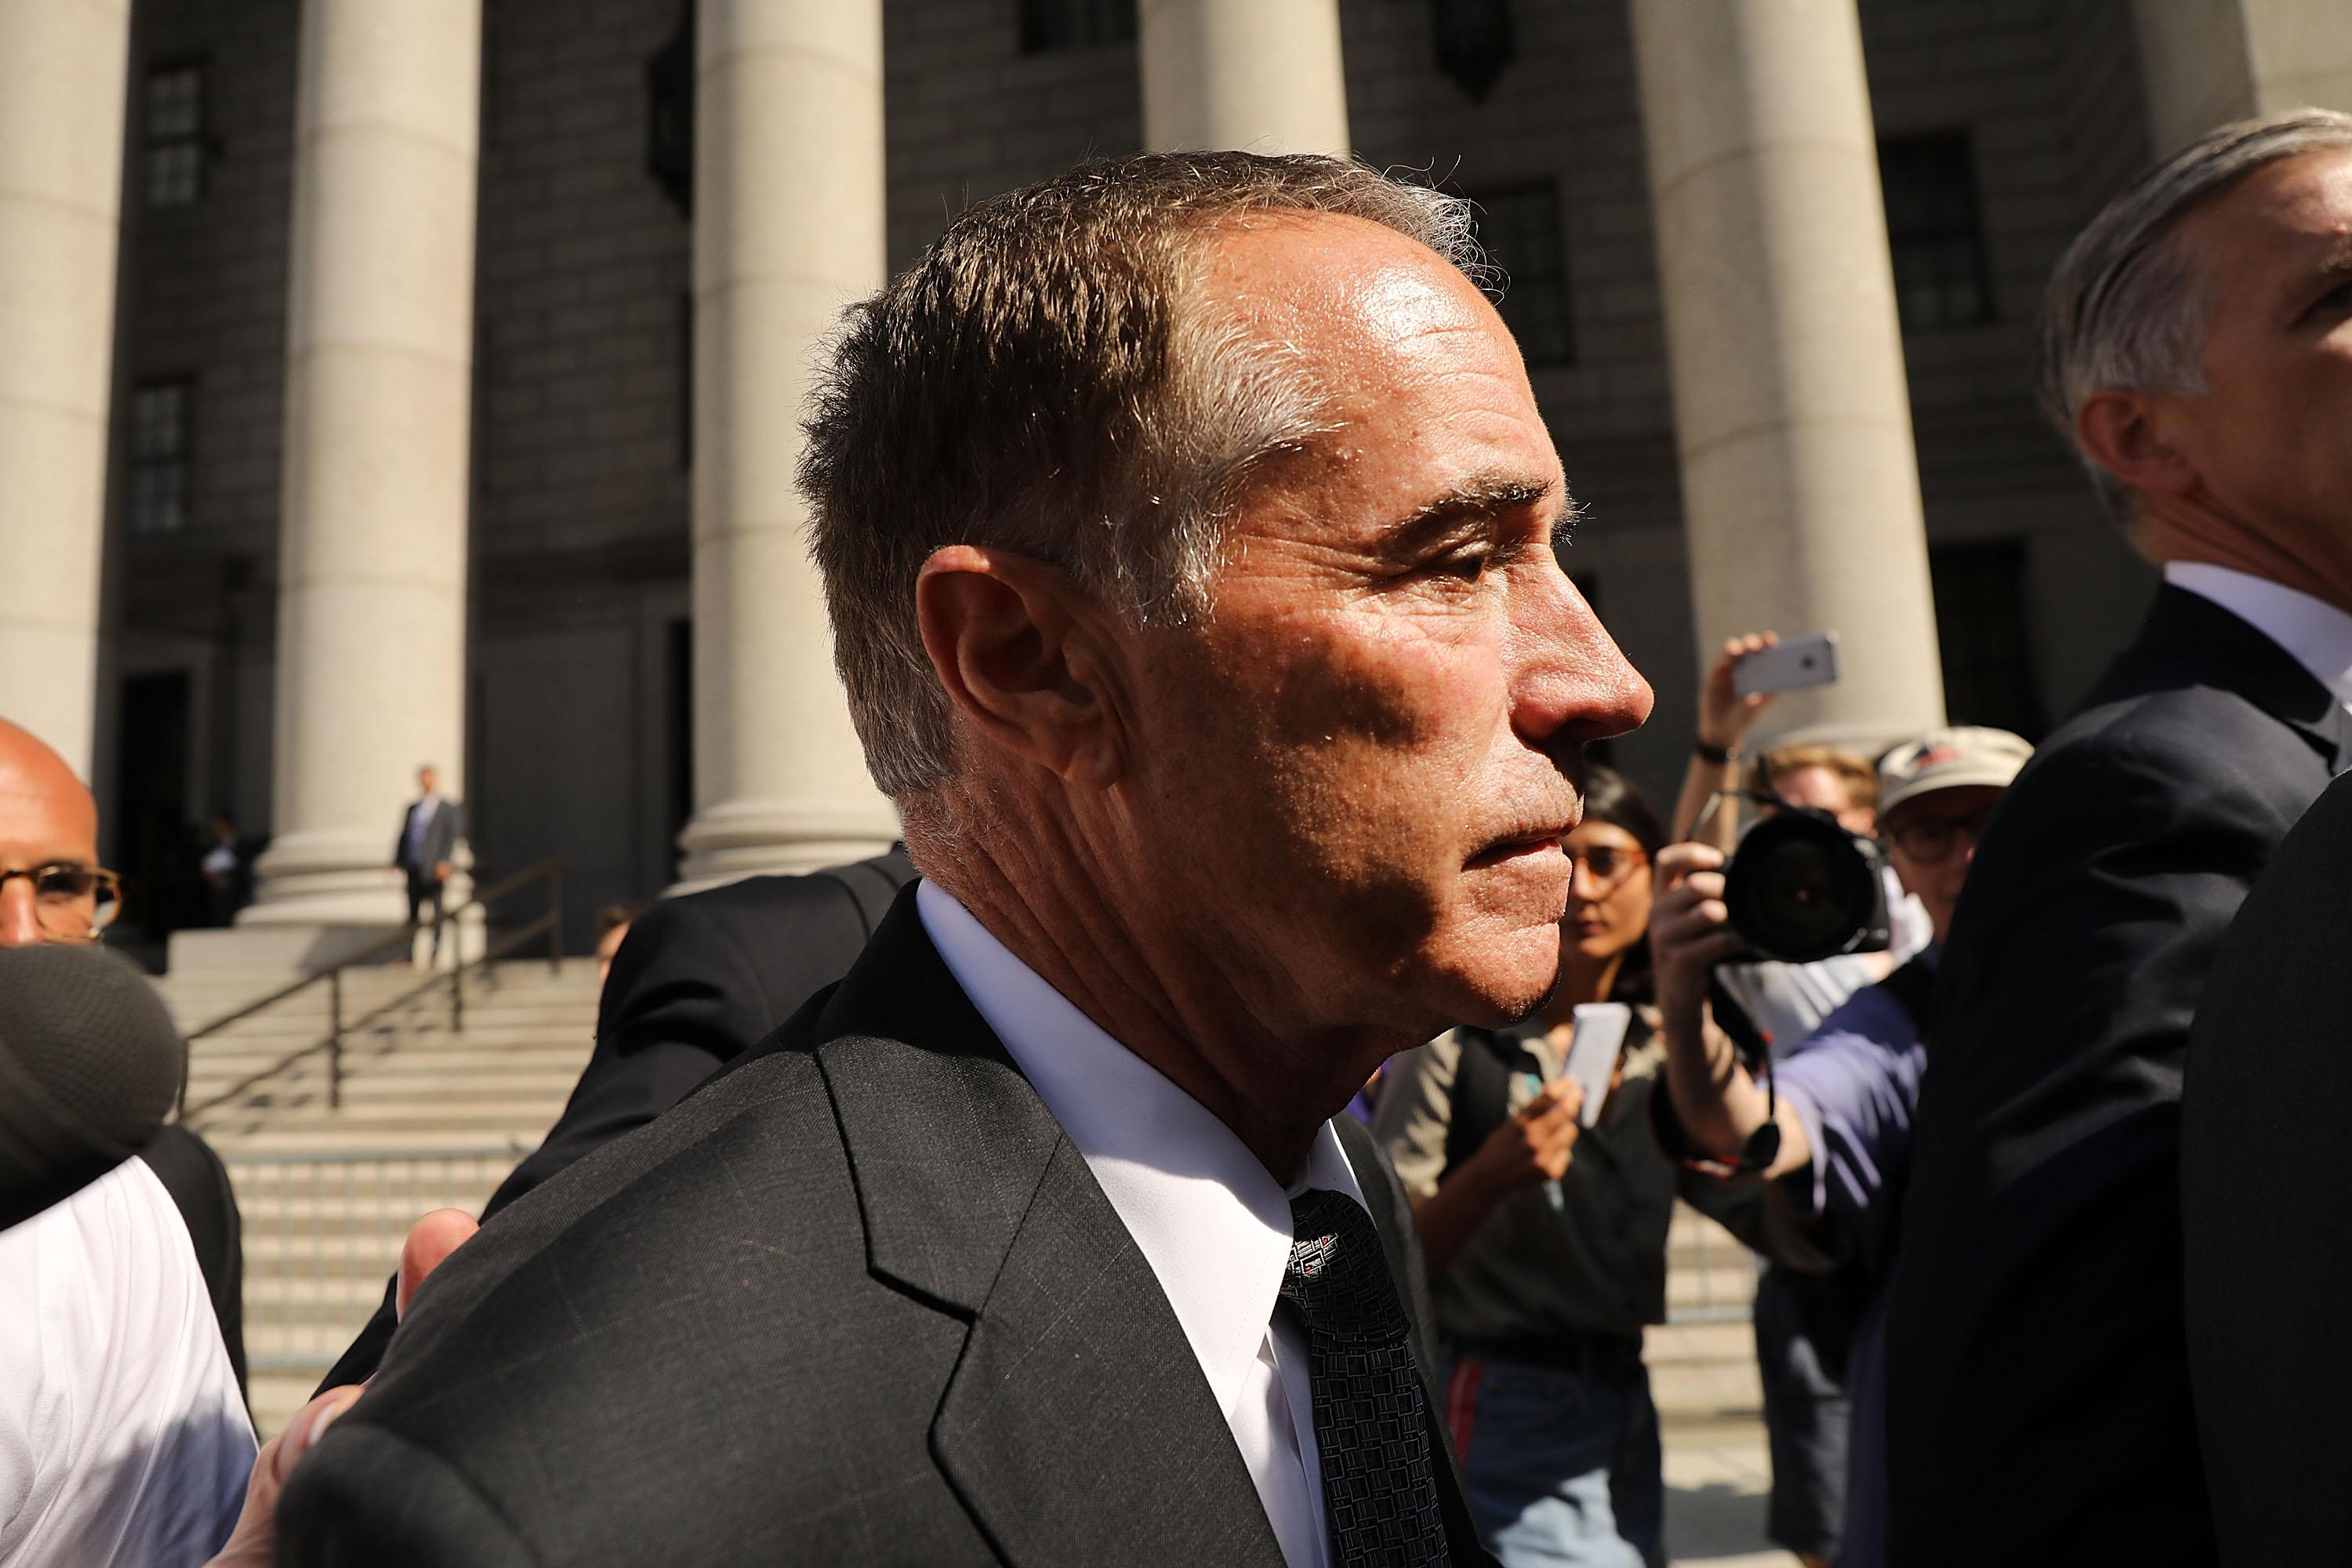 Chris Collins outside a courthouse, surrounded by cameras